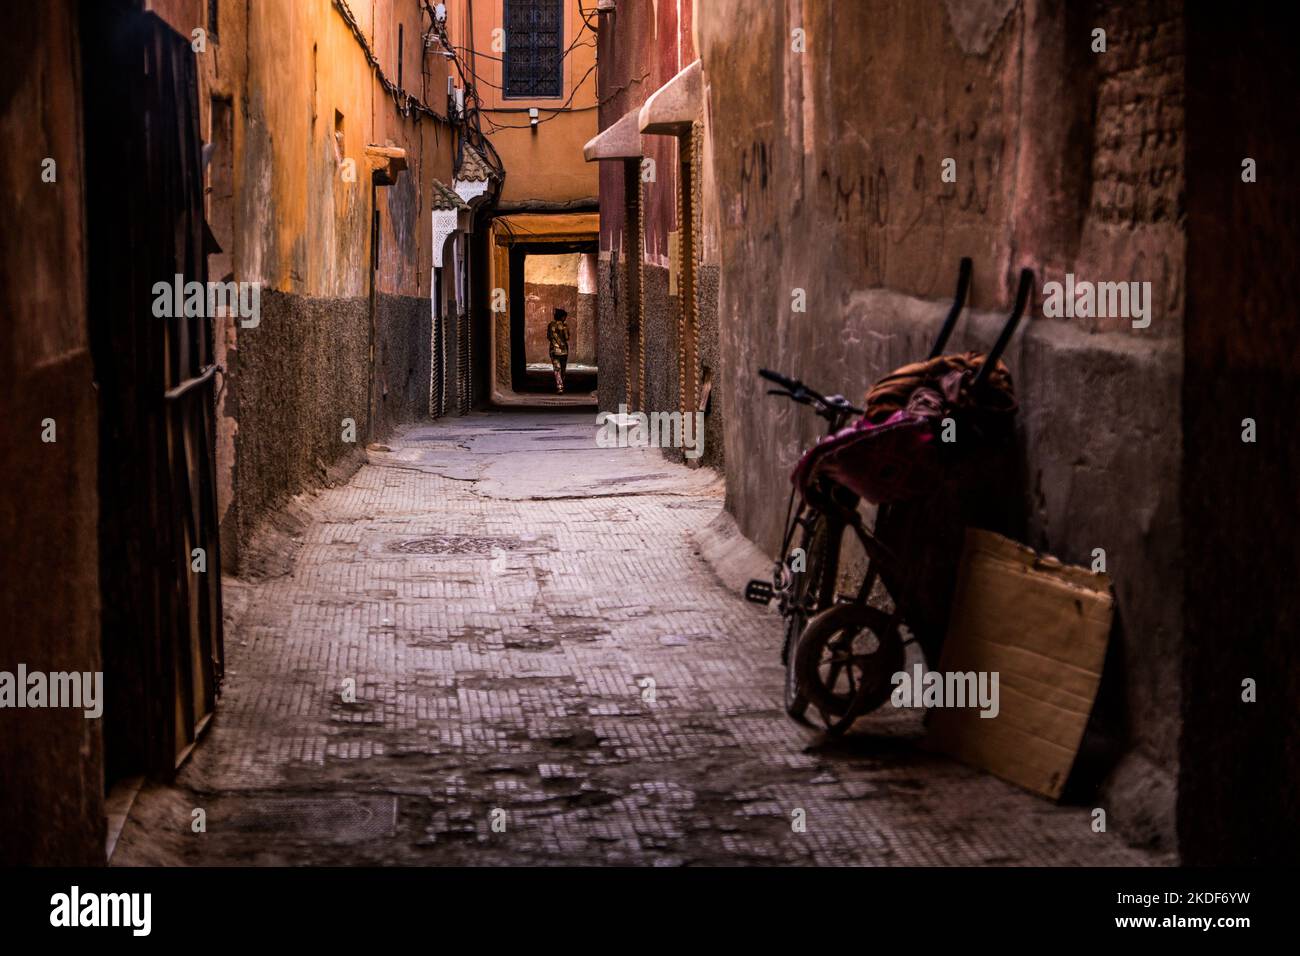 A dark alley In the medina ( old town) of Marrakech, Morocco Stock Photo